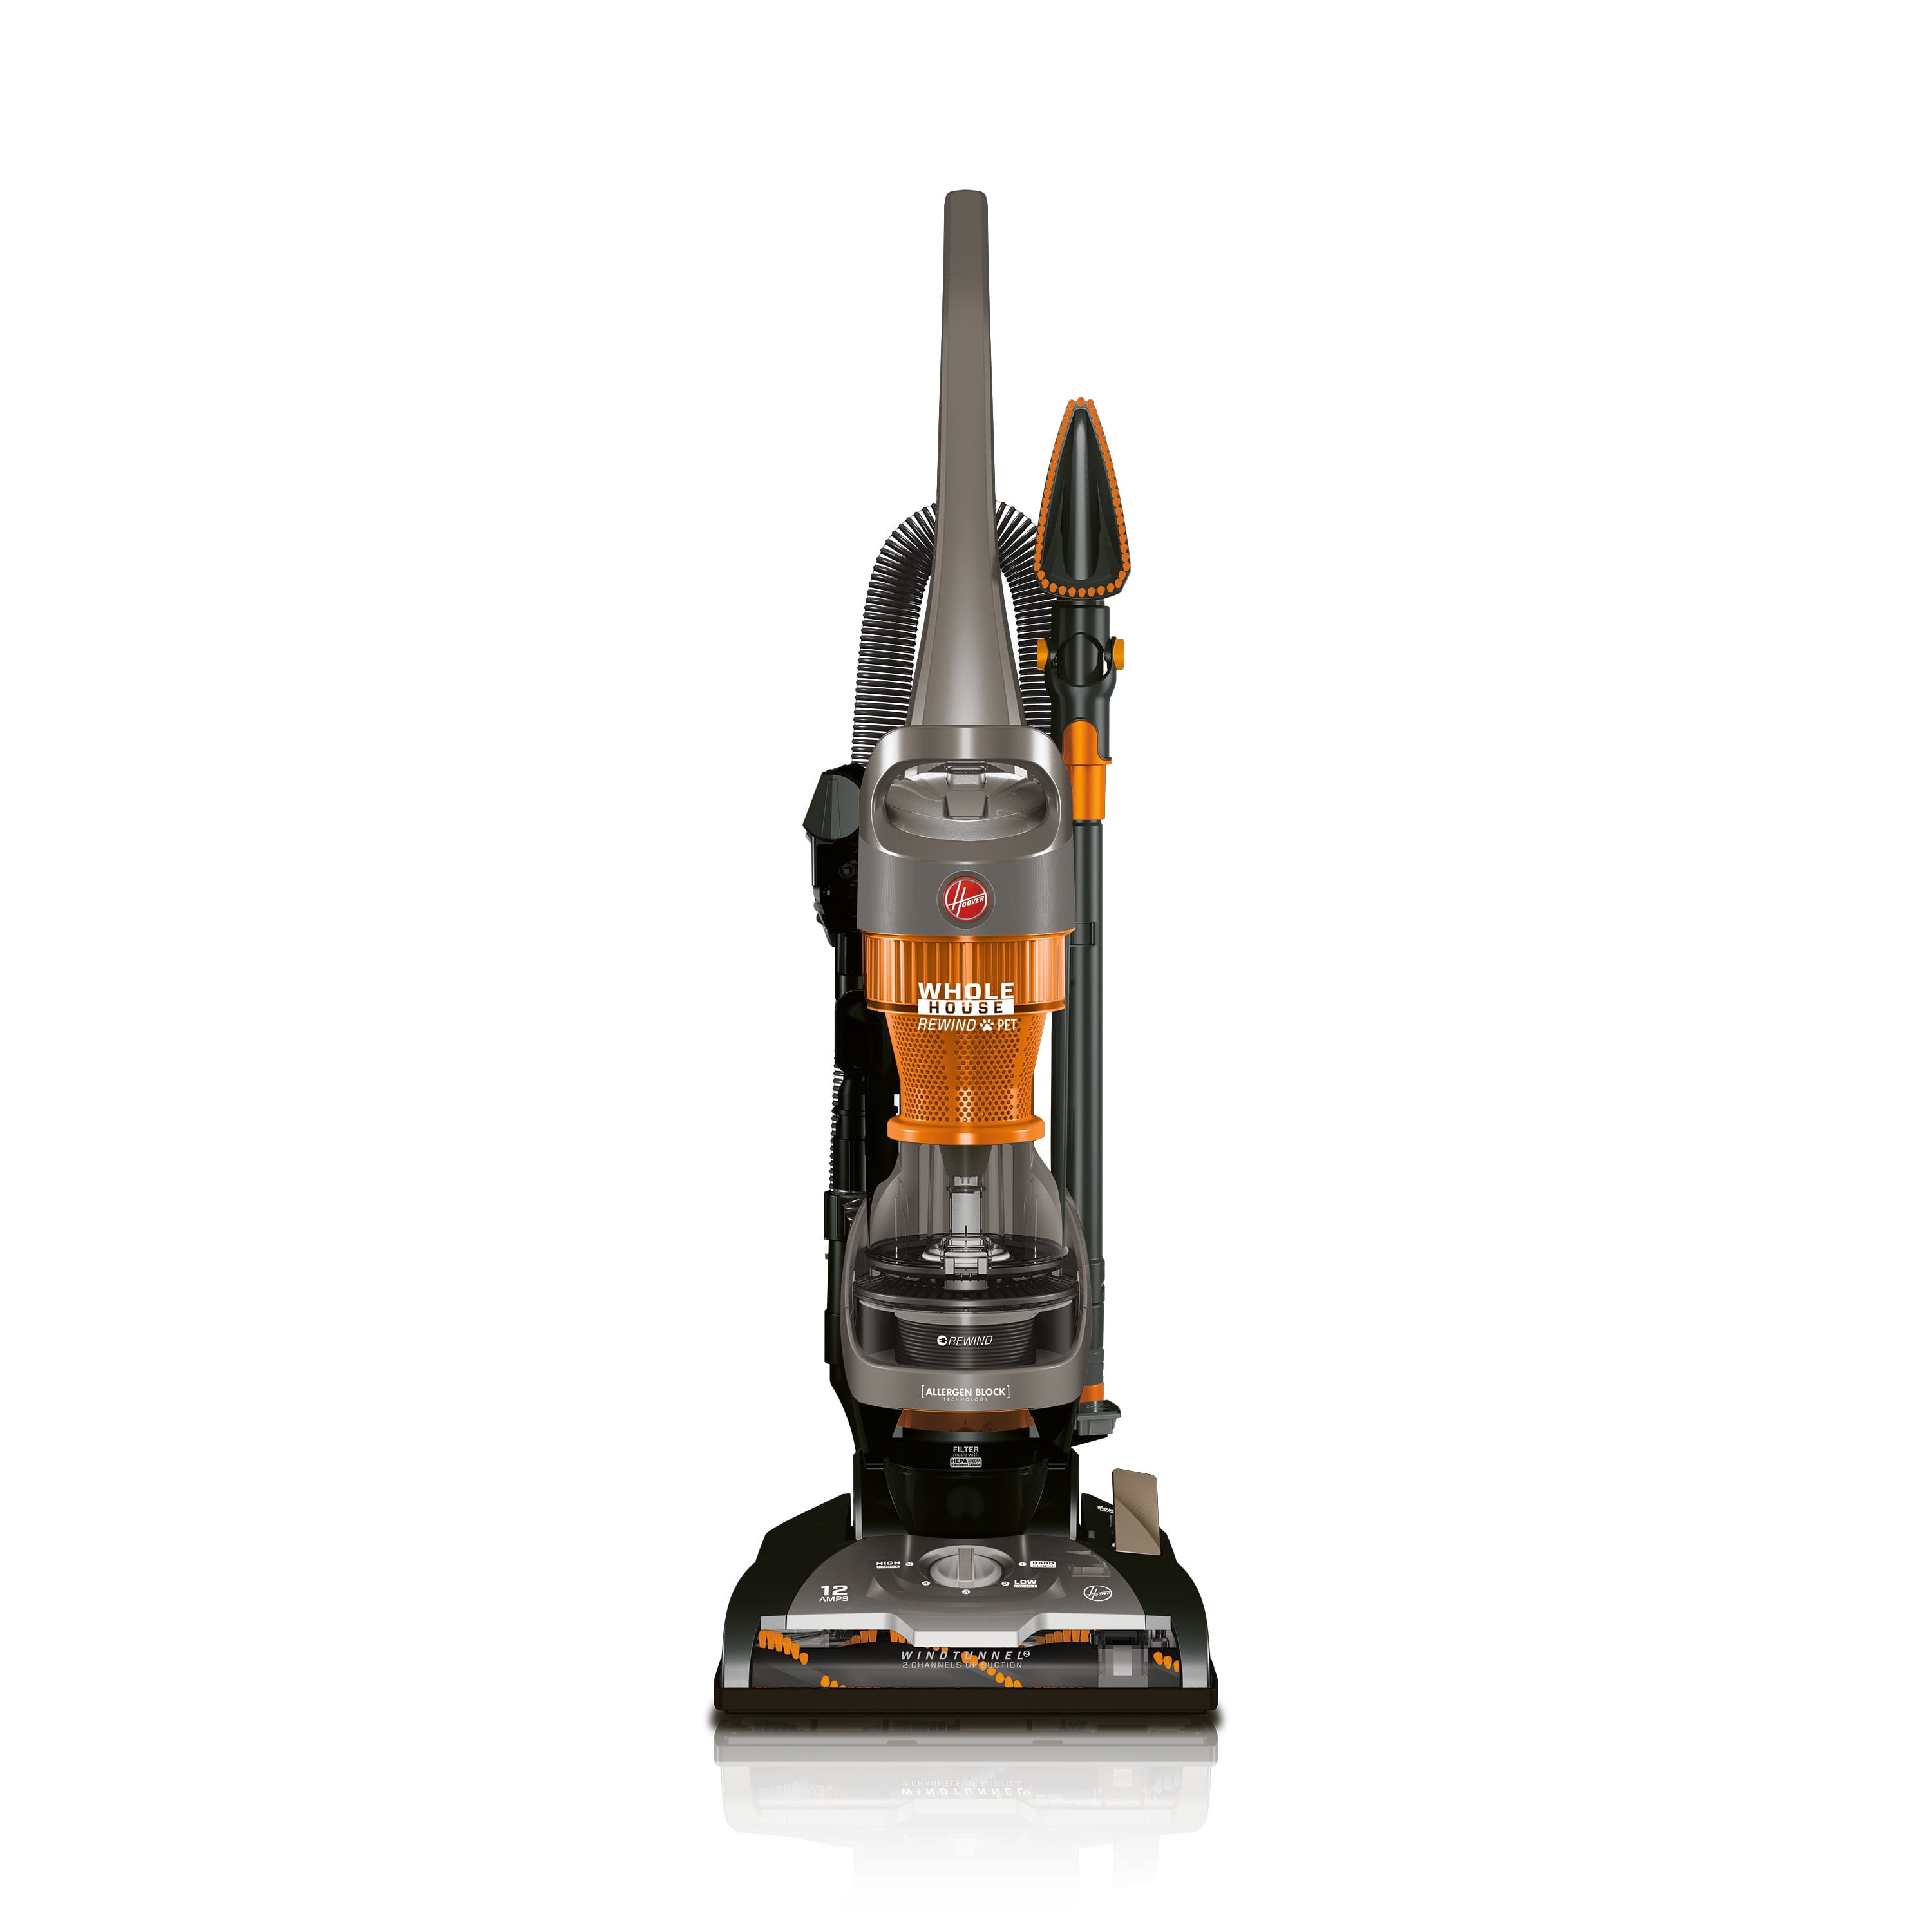 Hoover WindTunnel 2 Bagless Upright Vacuum (UH71255) $88 + Free Shipping